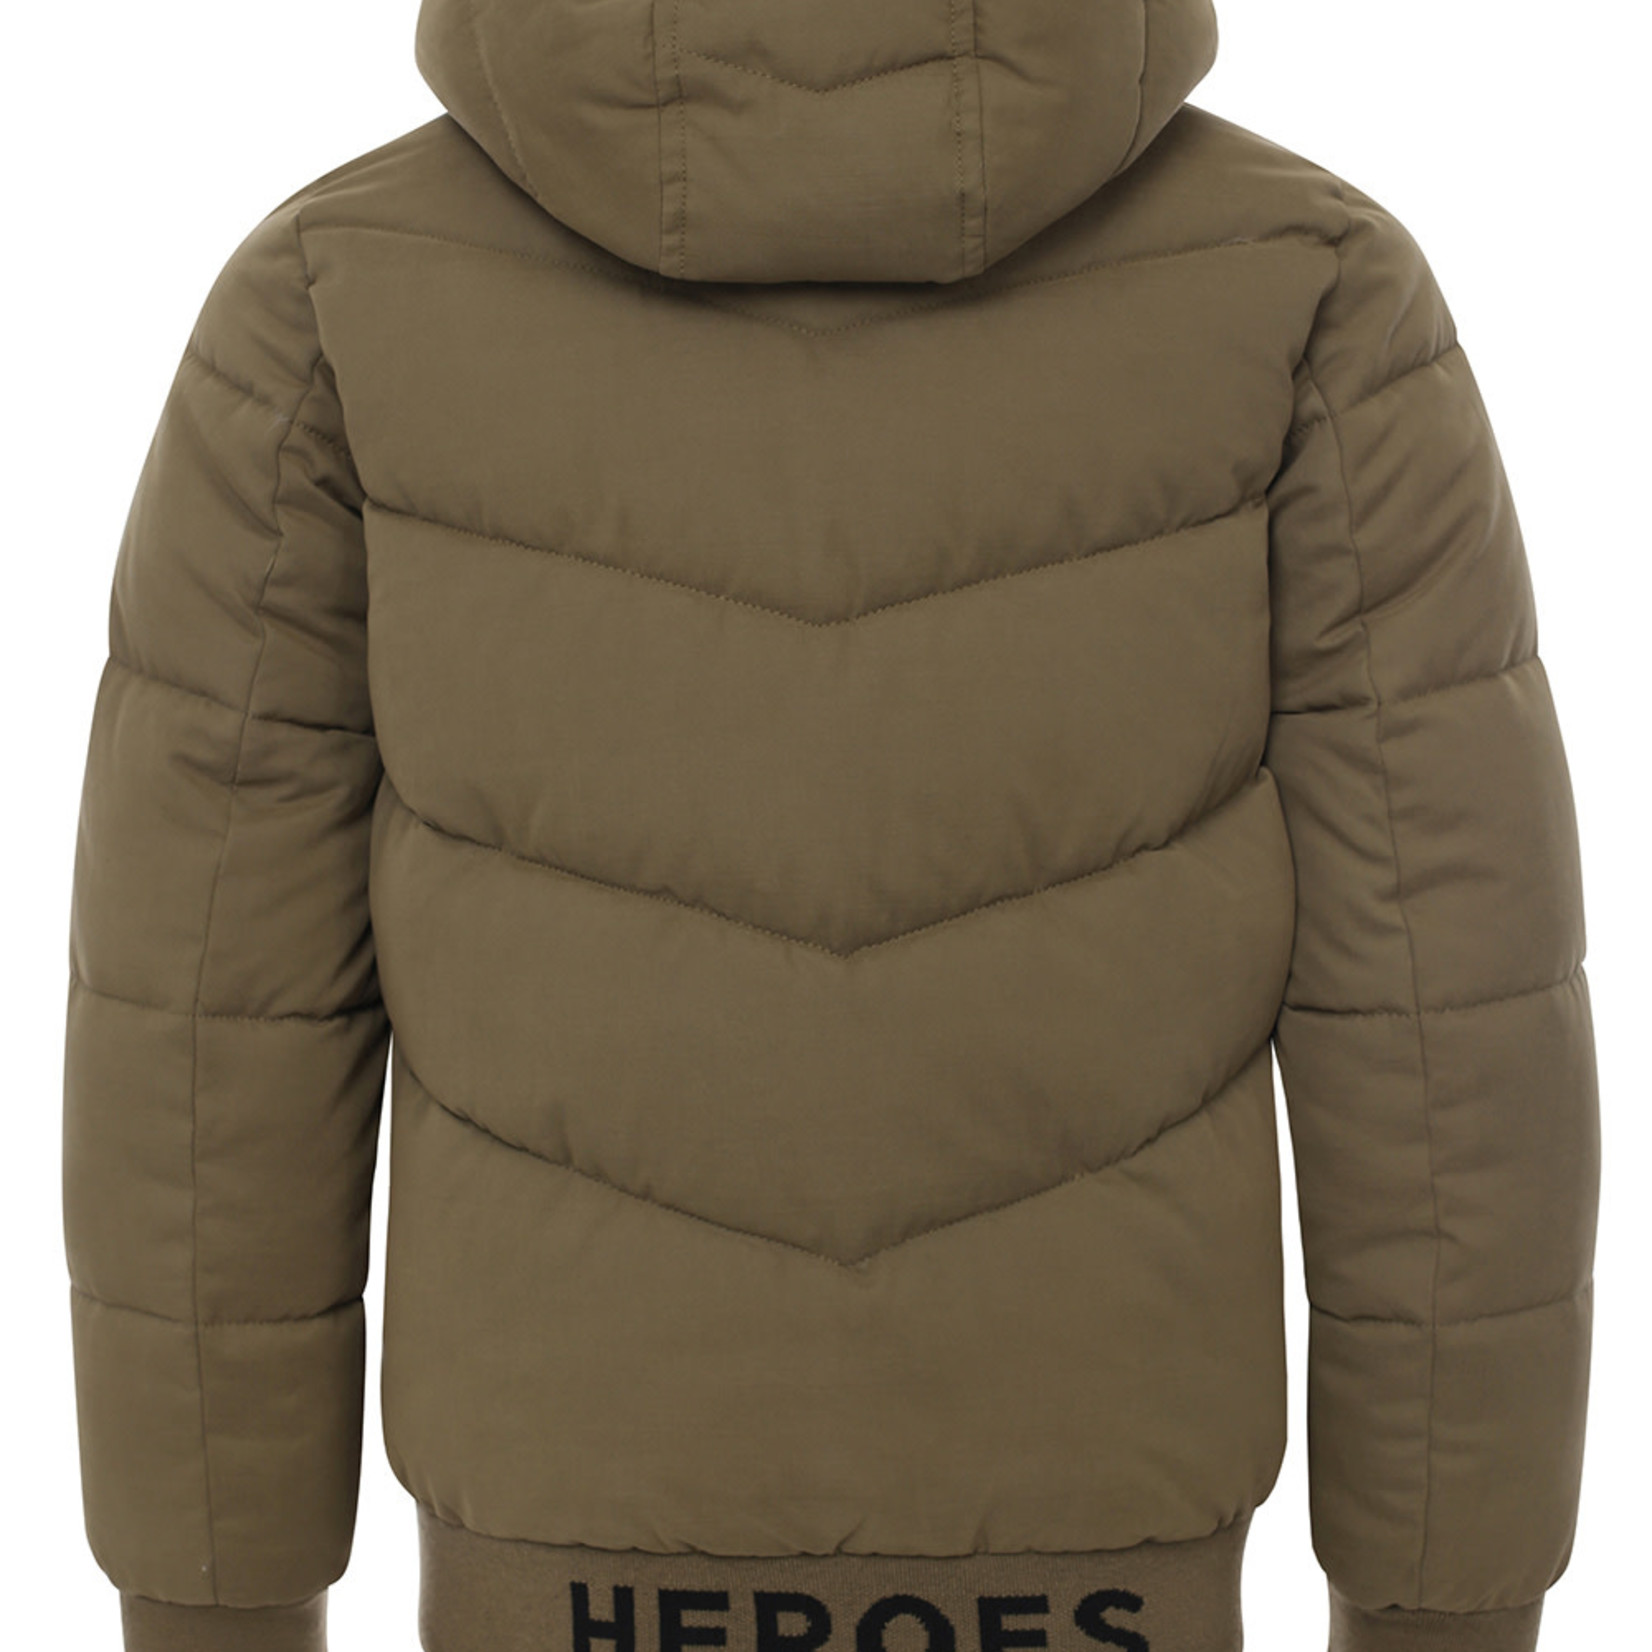 Common Heroes Common Heroes Fake down jacket